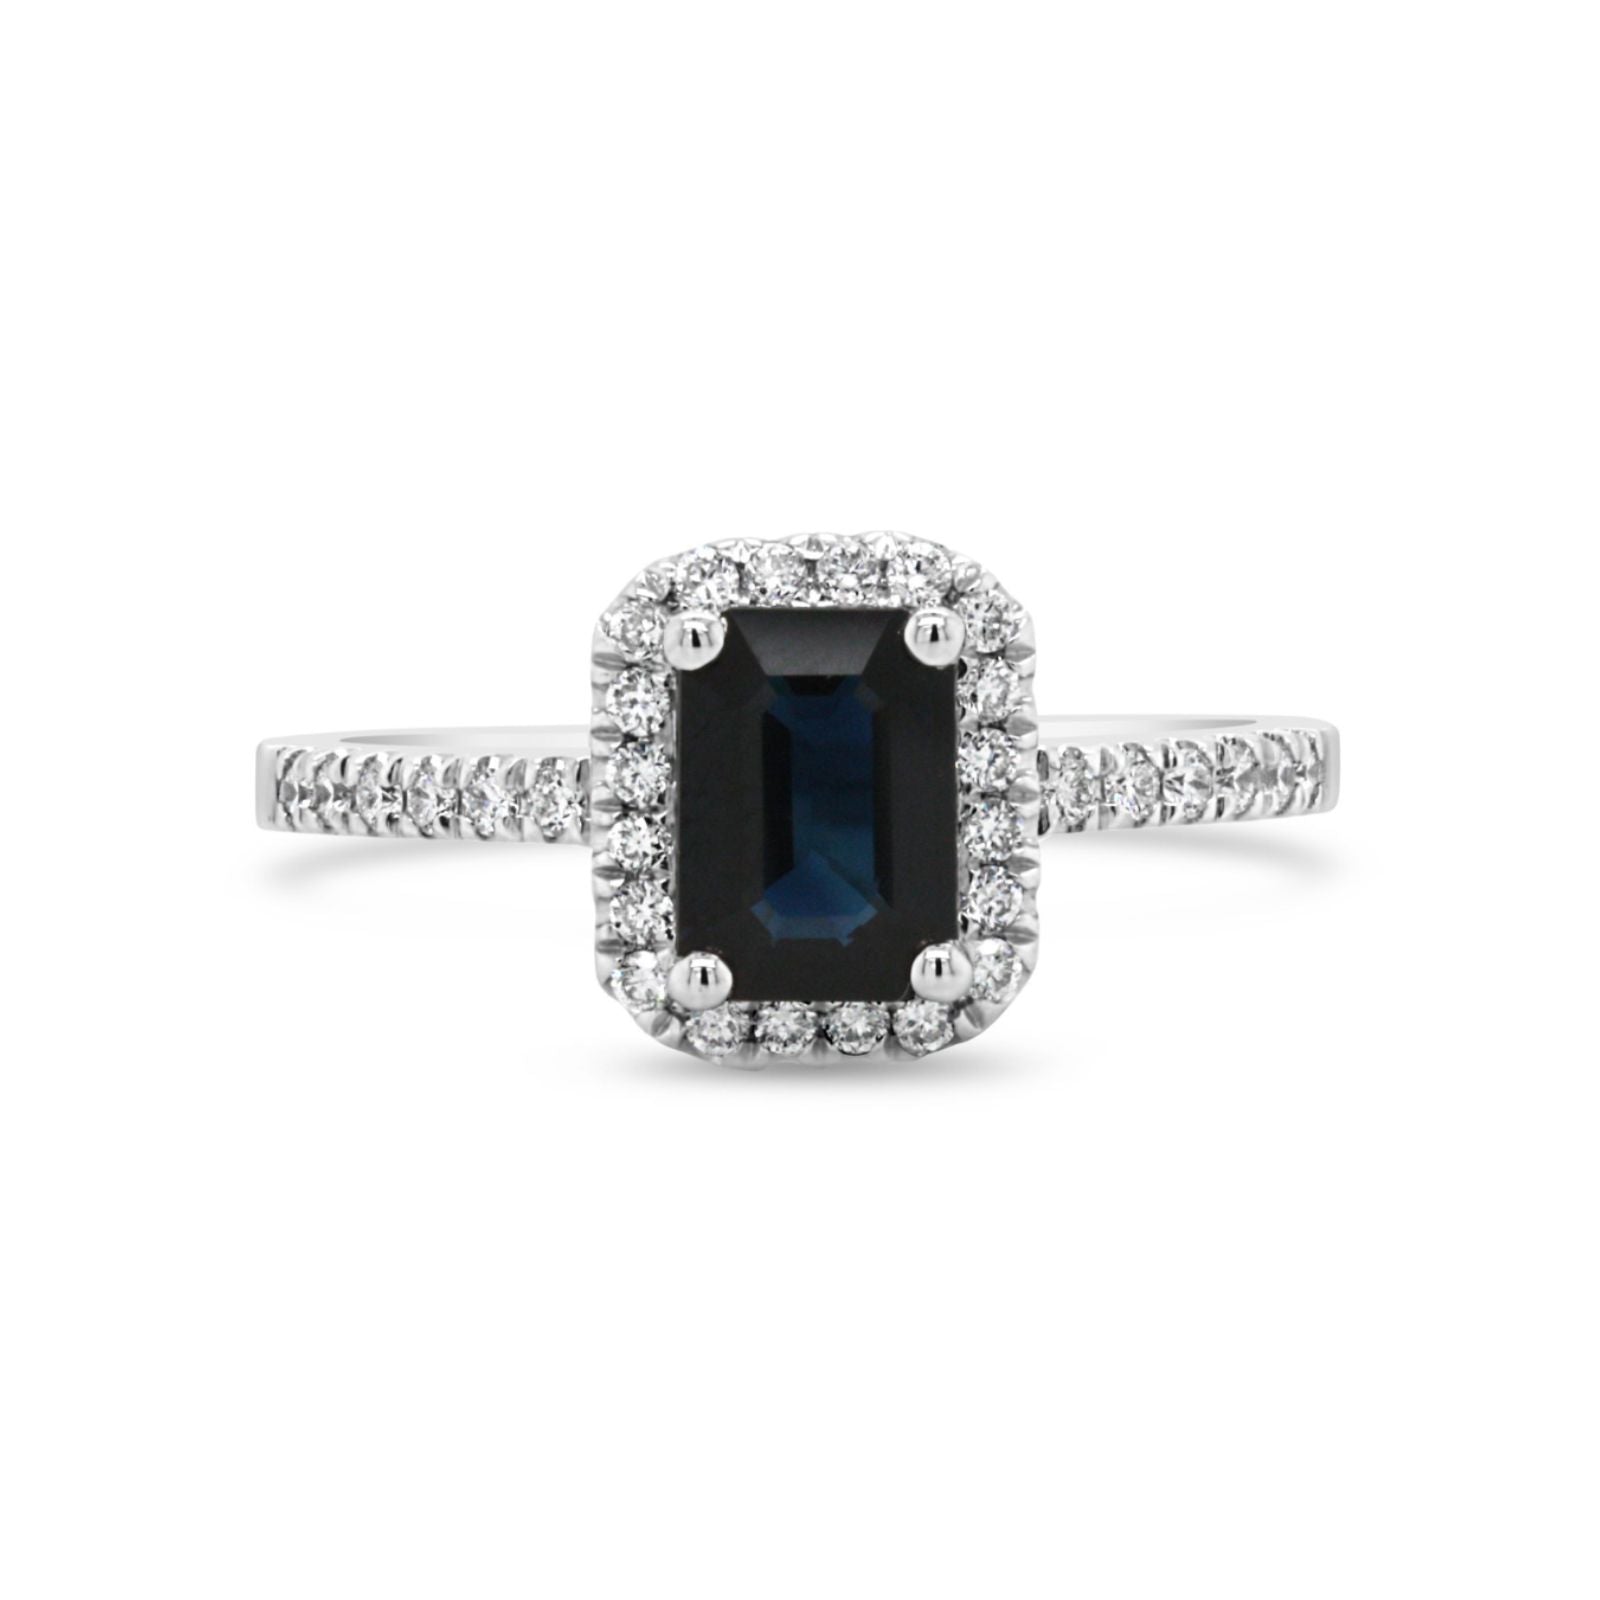 18ct White Gold Emerald Cut Sapphire Ring With Diamond Halo & Shoulders